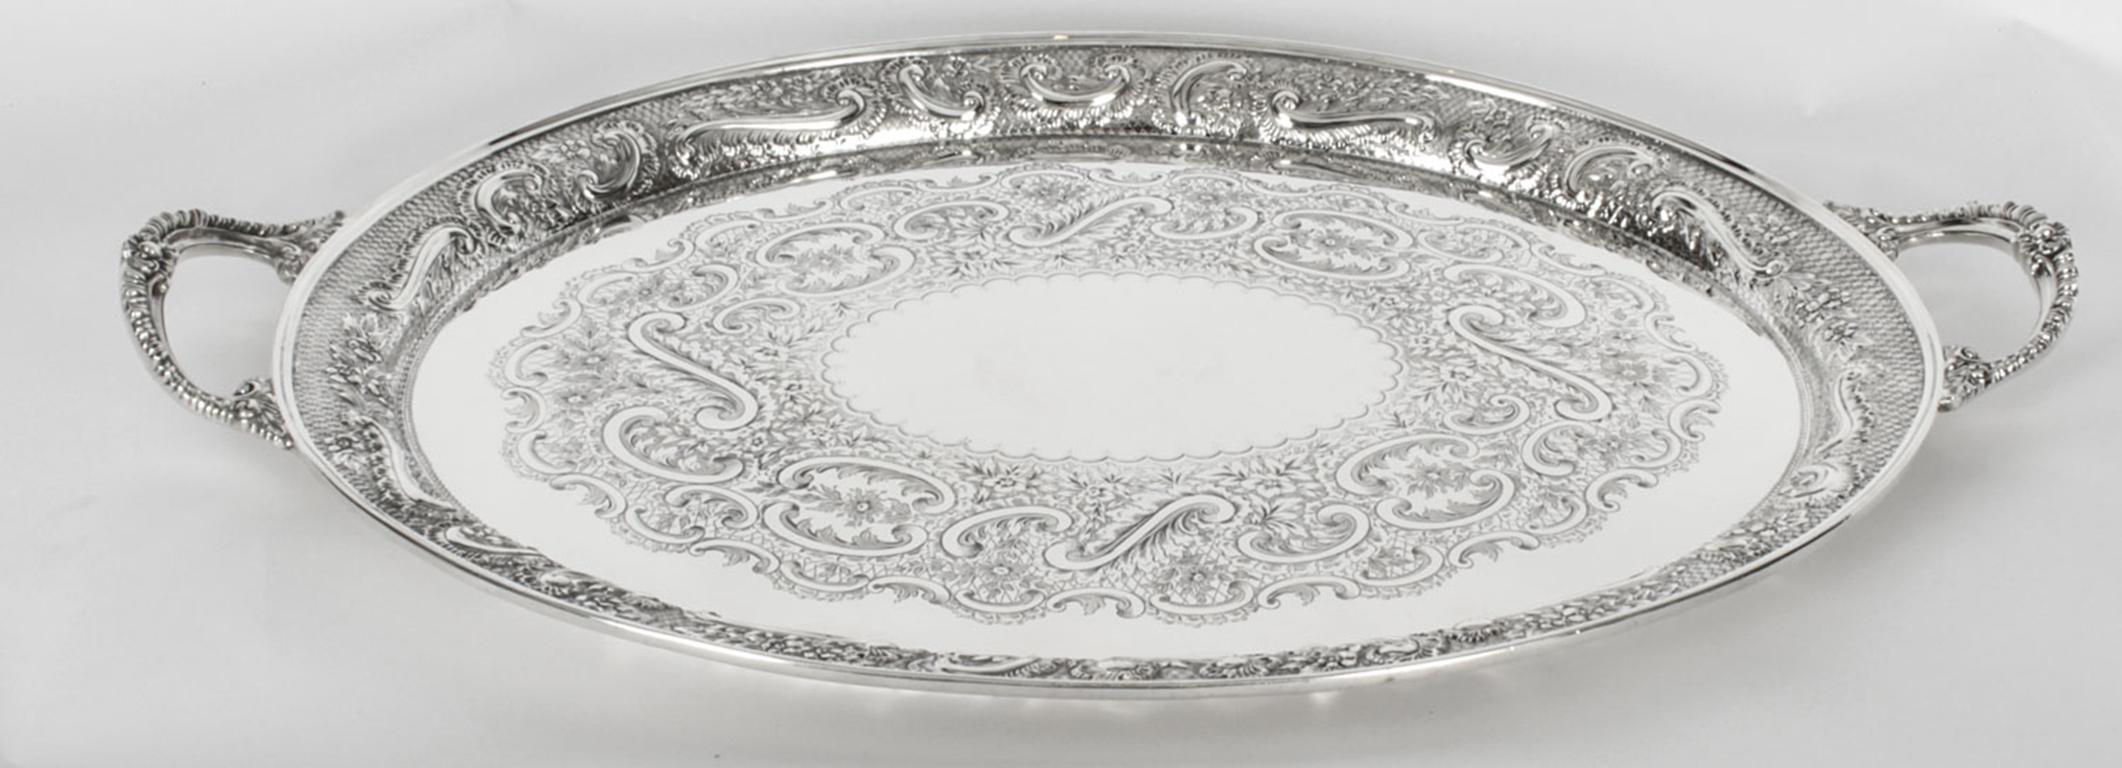 Antique Oval Victorian Silver Plated Tray by Mappin & Webb, 19th Century 8